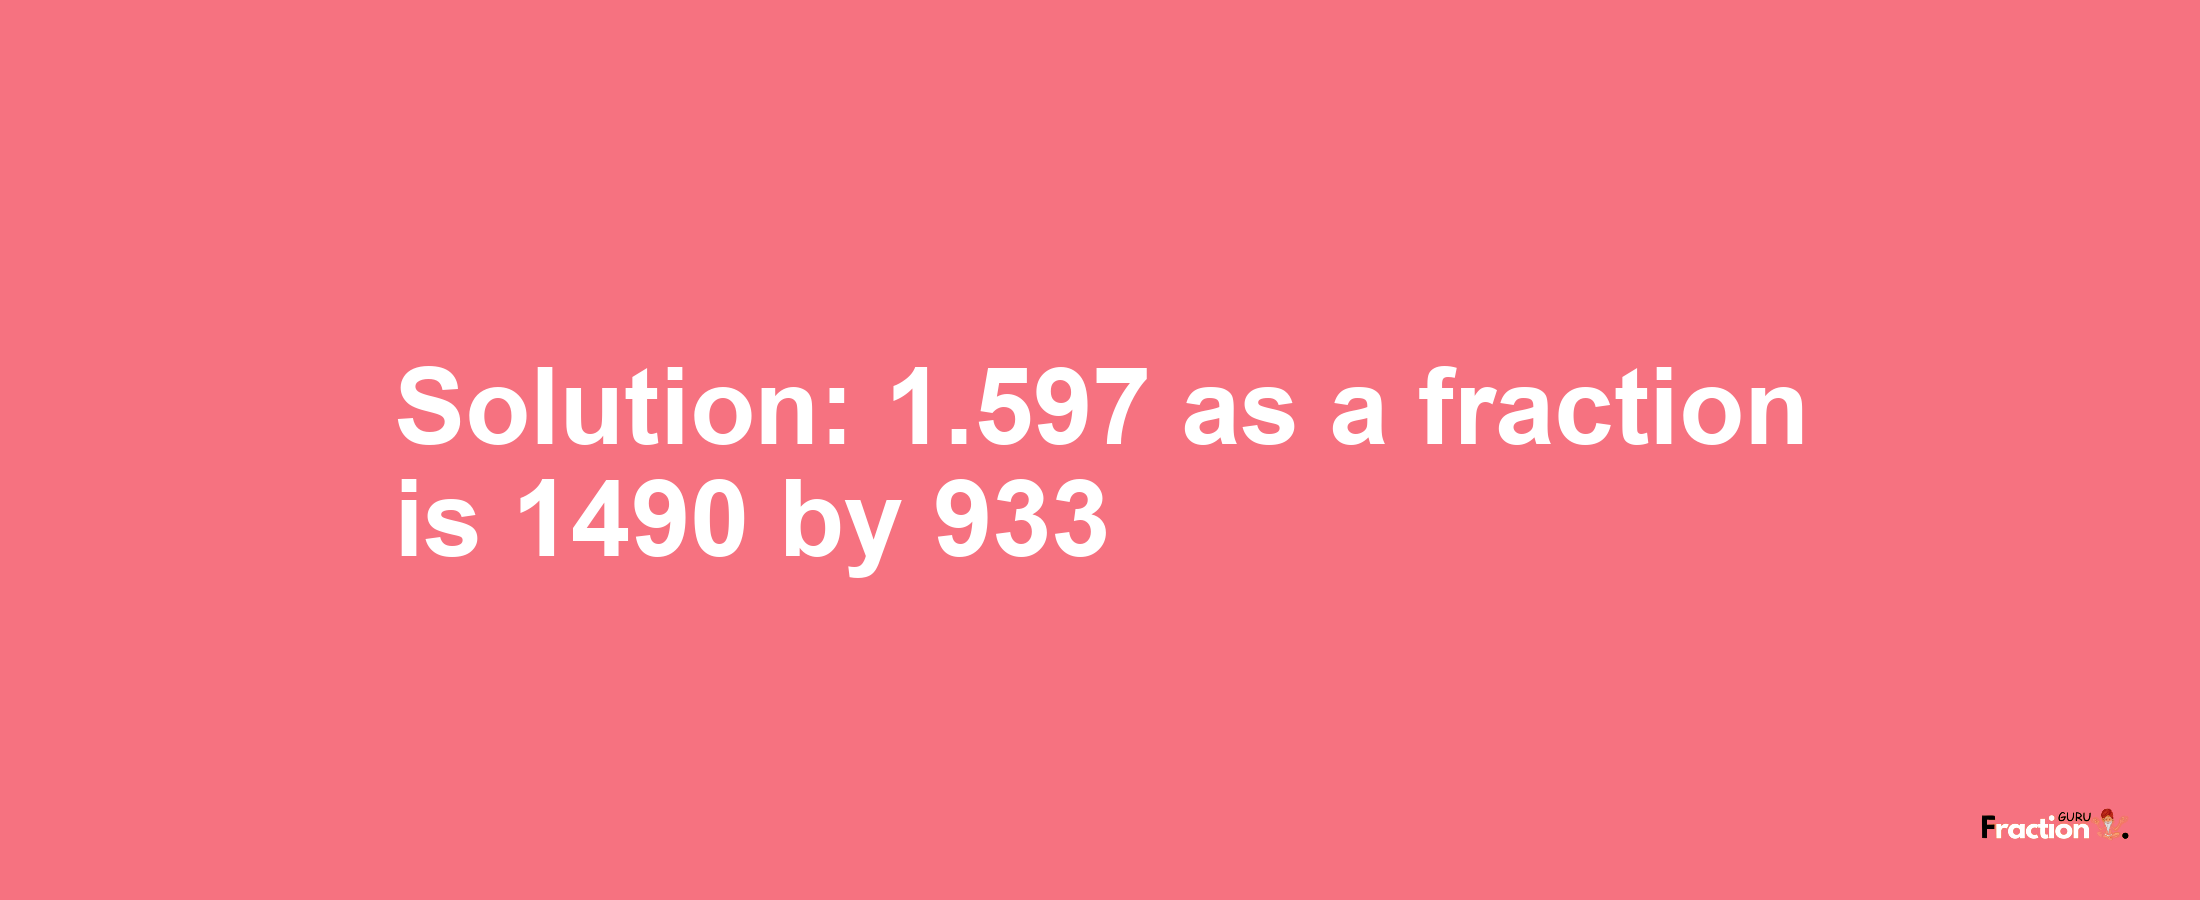 Solution:1.597 as a fraction is 1490/933